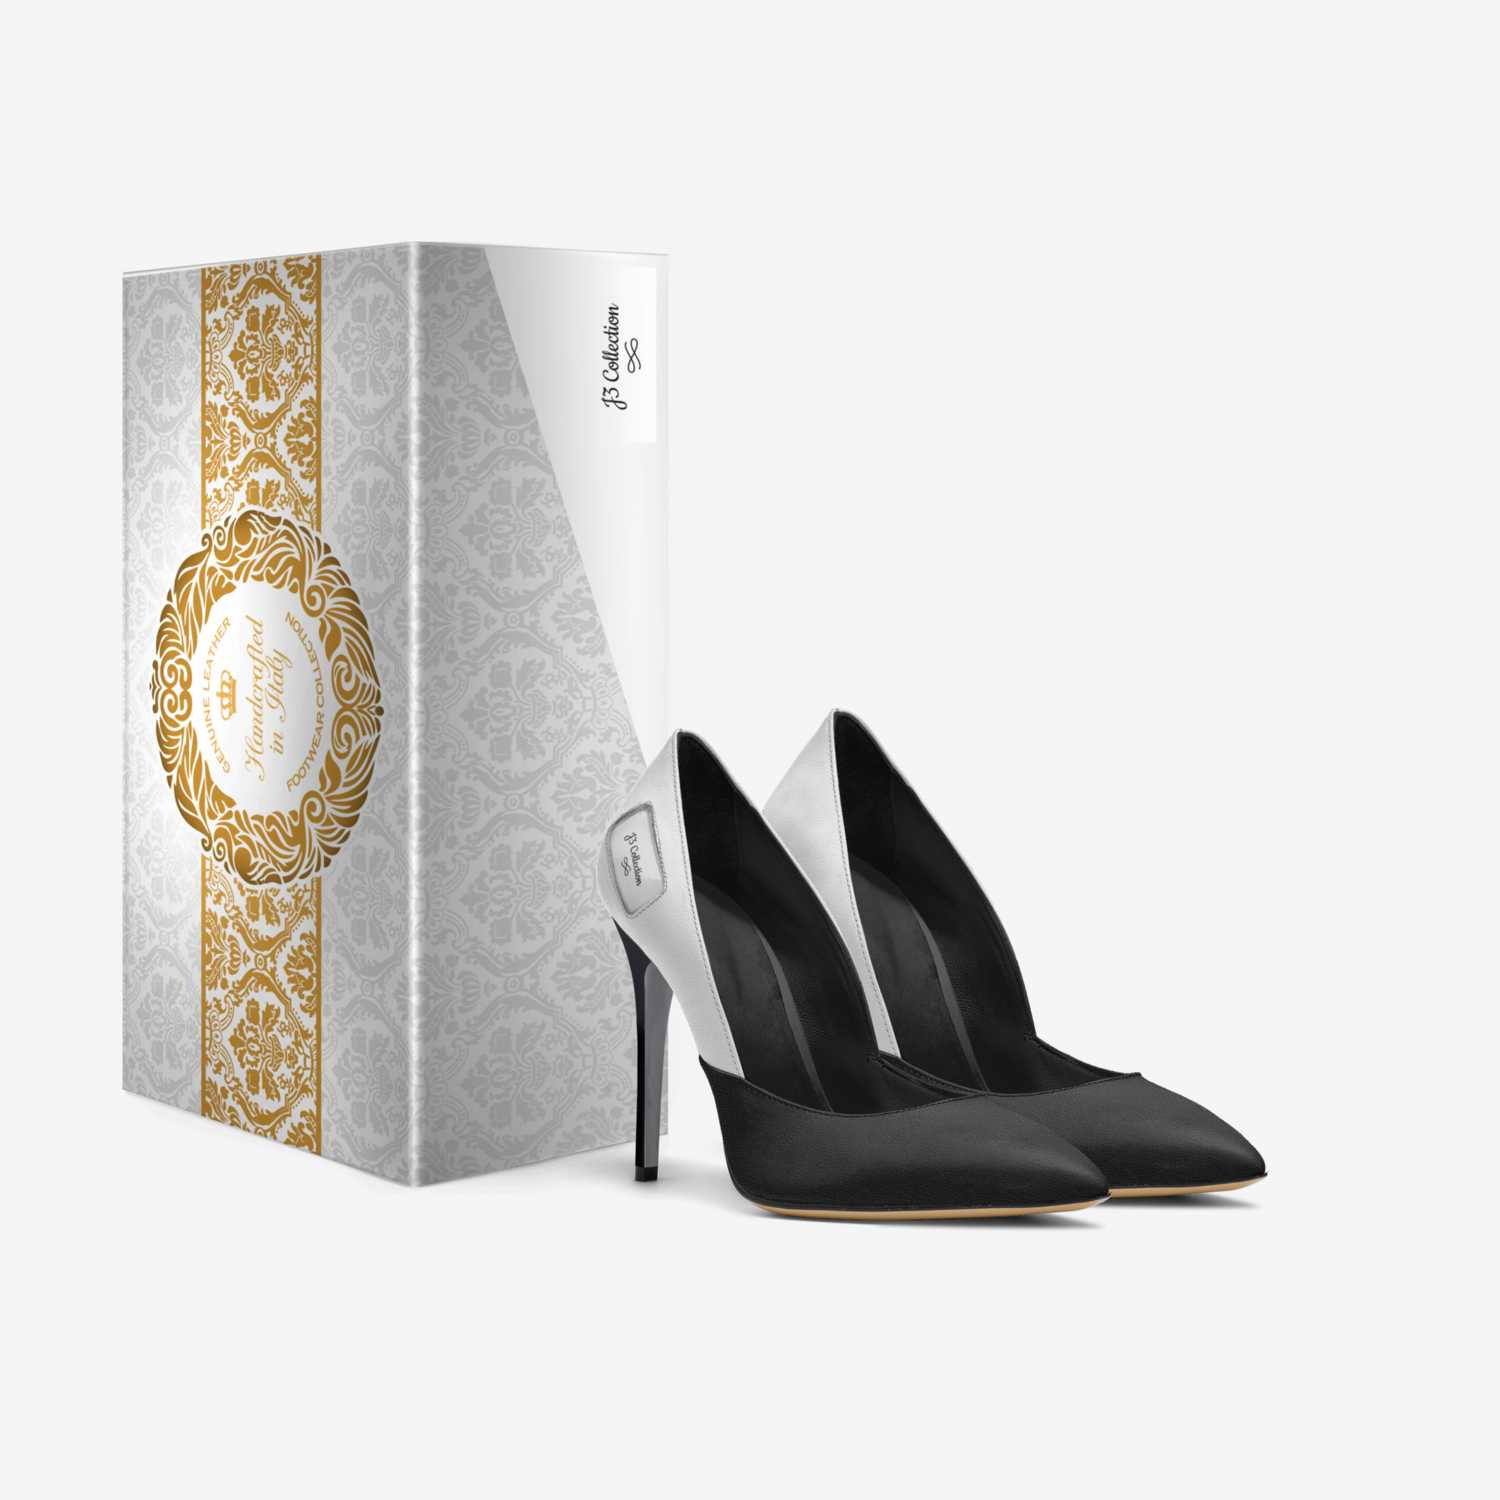 J3 Collection  custom made in Italy shoes by Stephanie Jordan | Box view